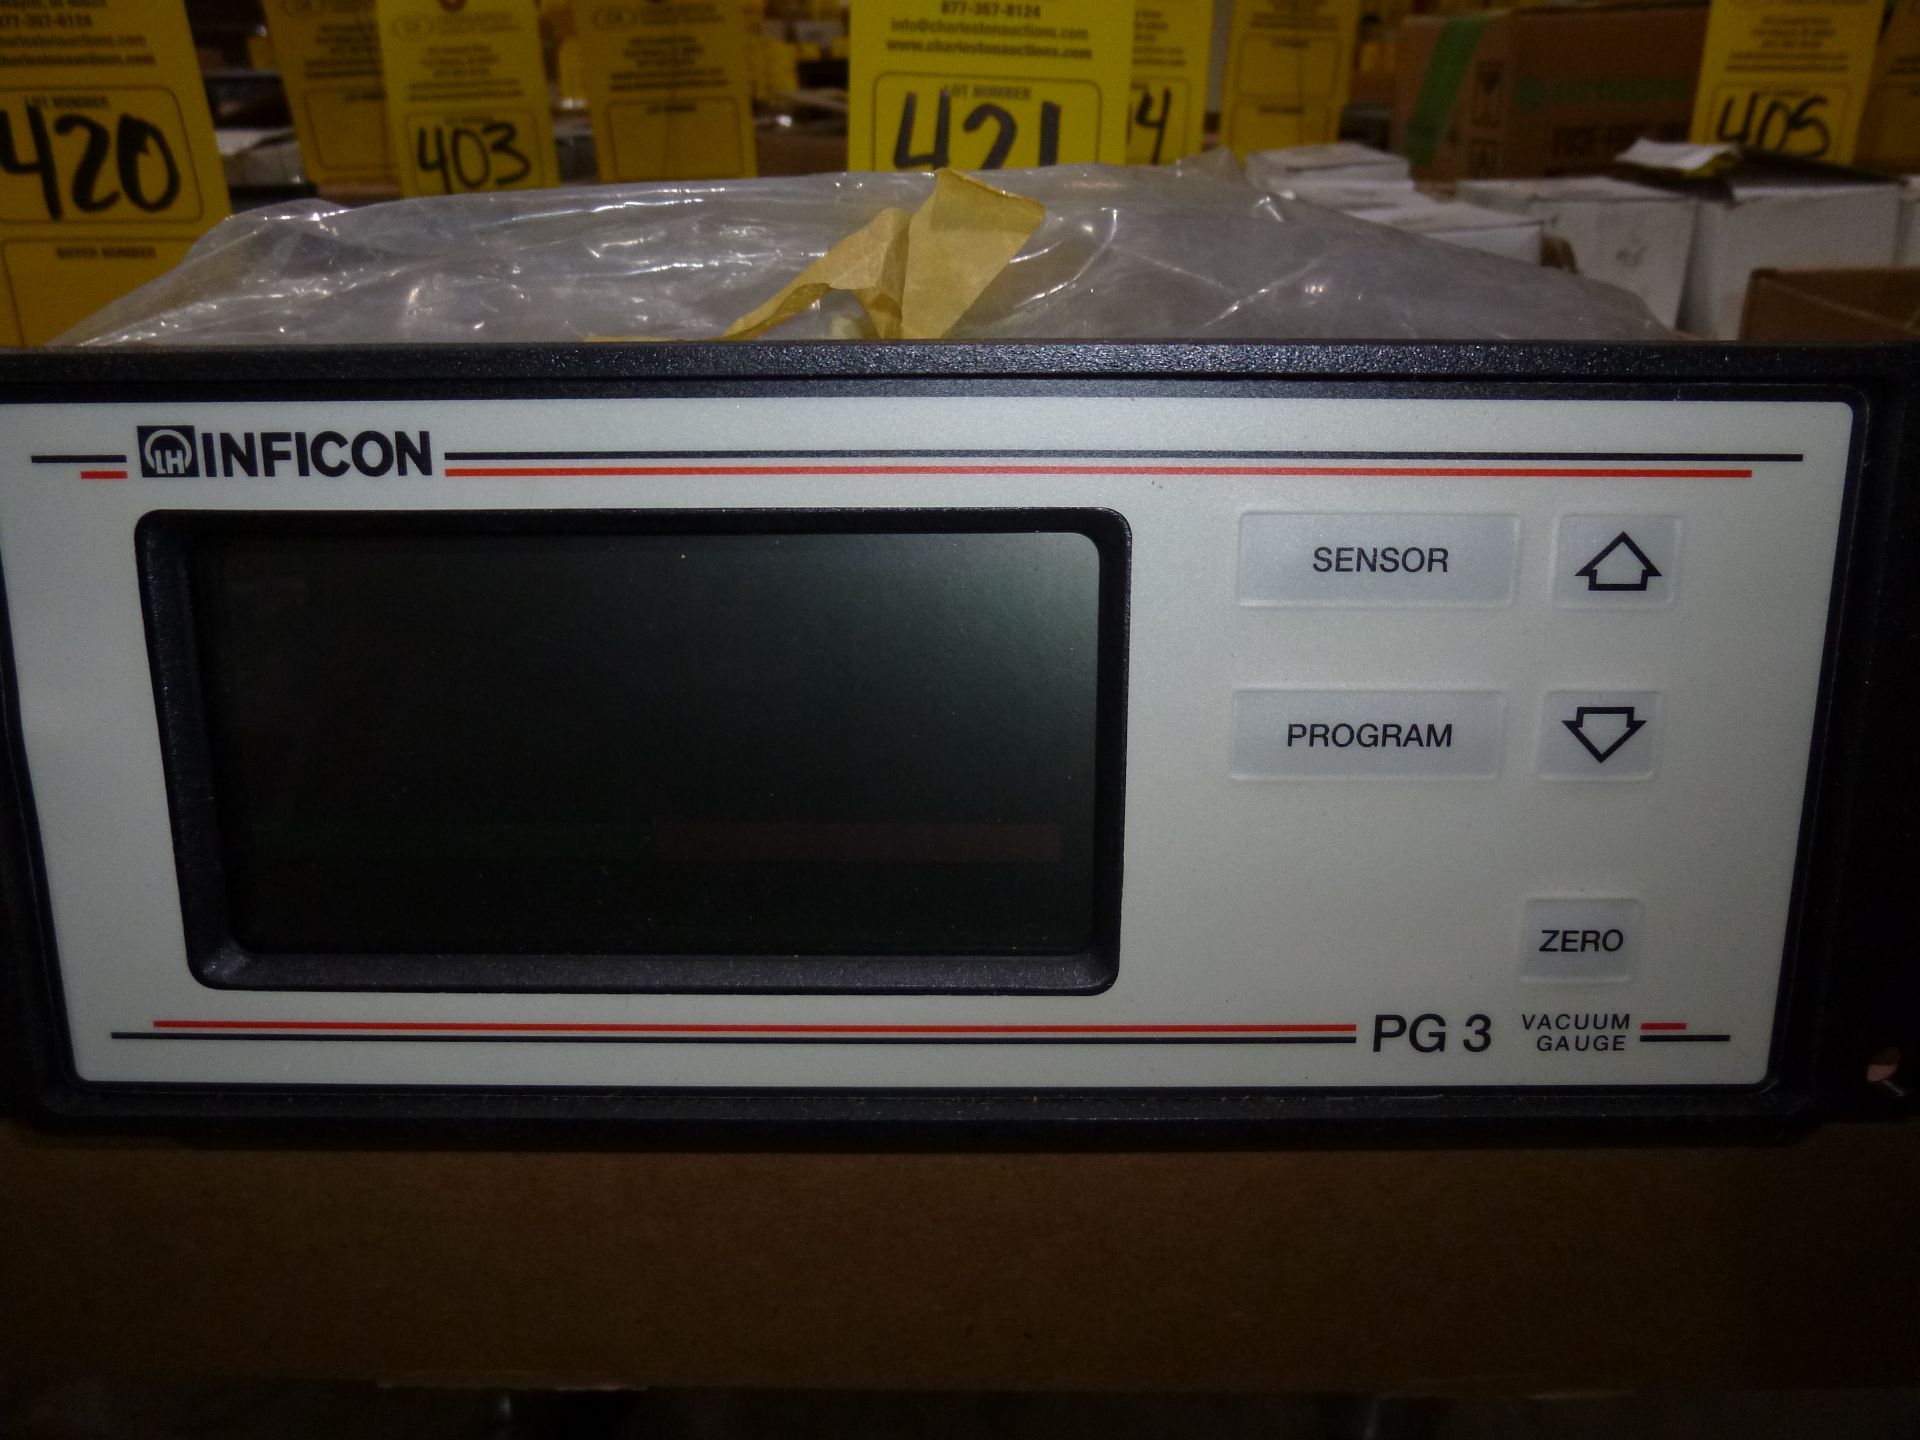 Inficon Model PG3 vacuum gauge, new without box, as always with Brolyn LLC auctions, all lots can be - Image 2 of 2